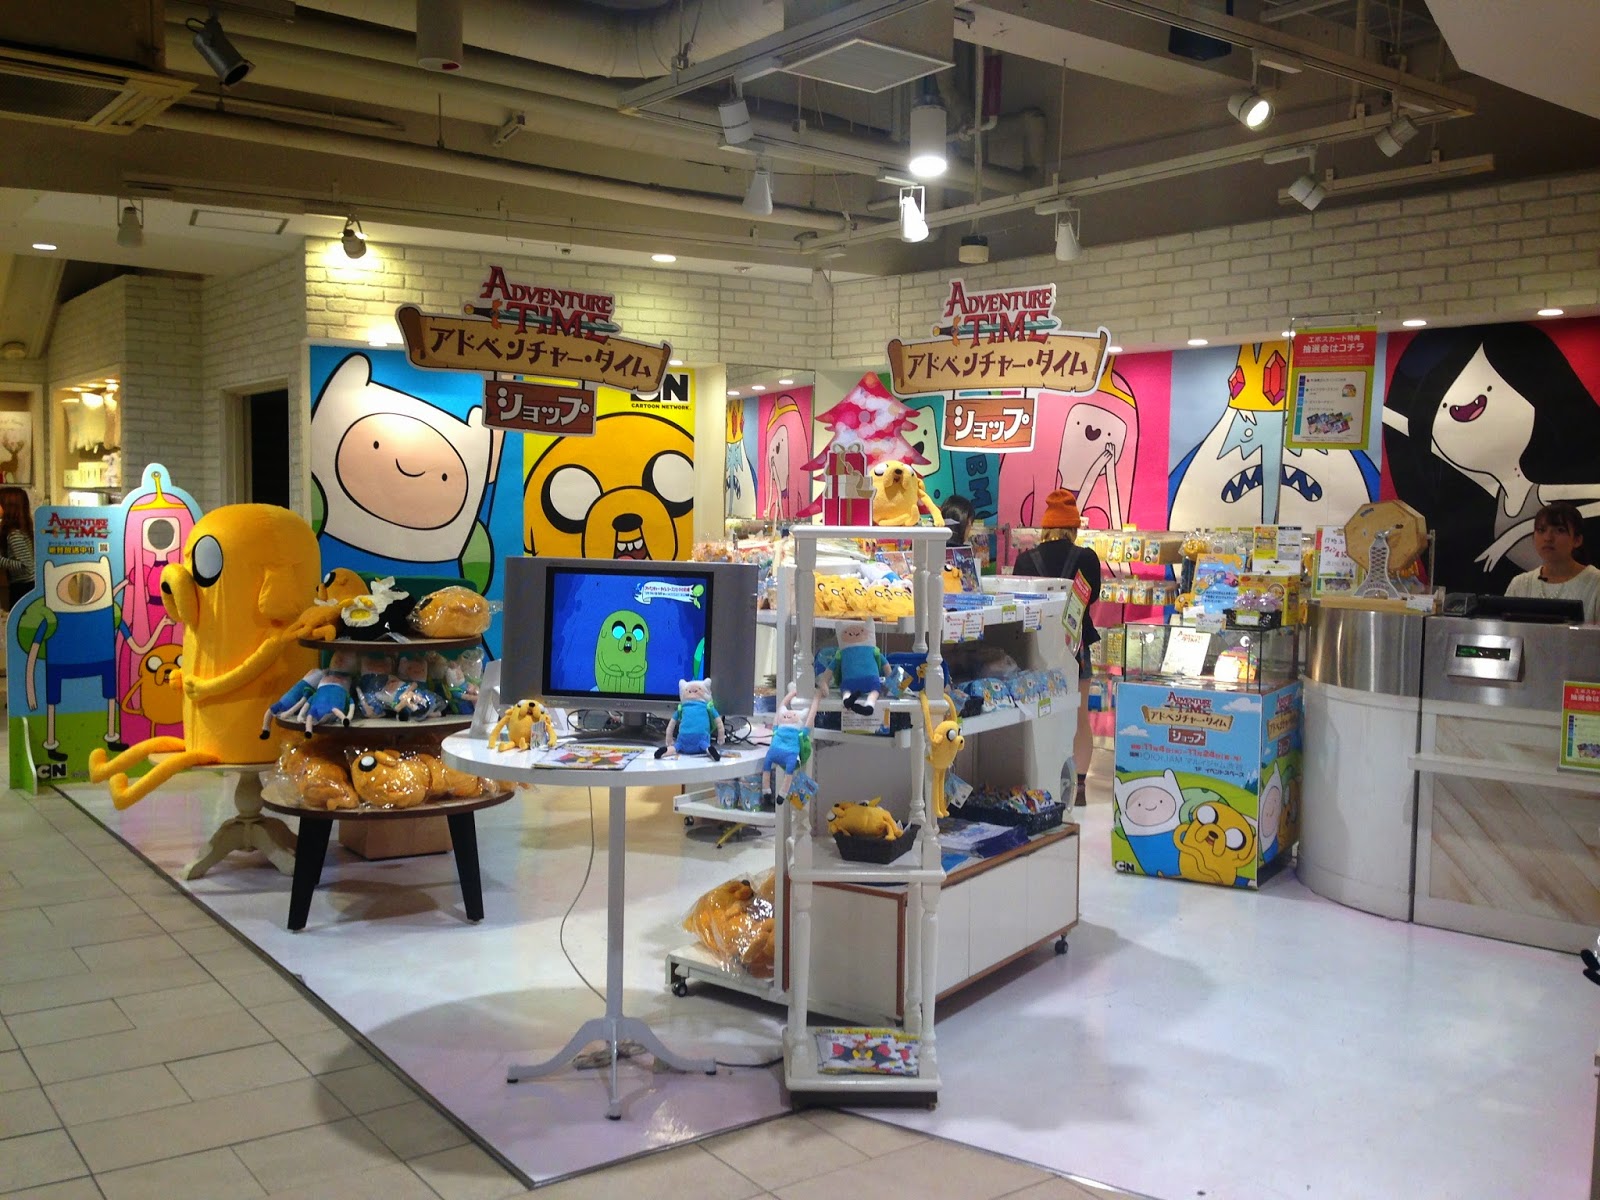 Travel With Me Adventure Time Limited Shop In Shibuya